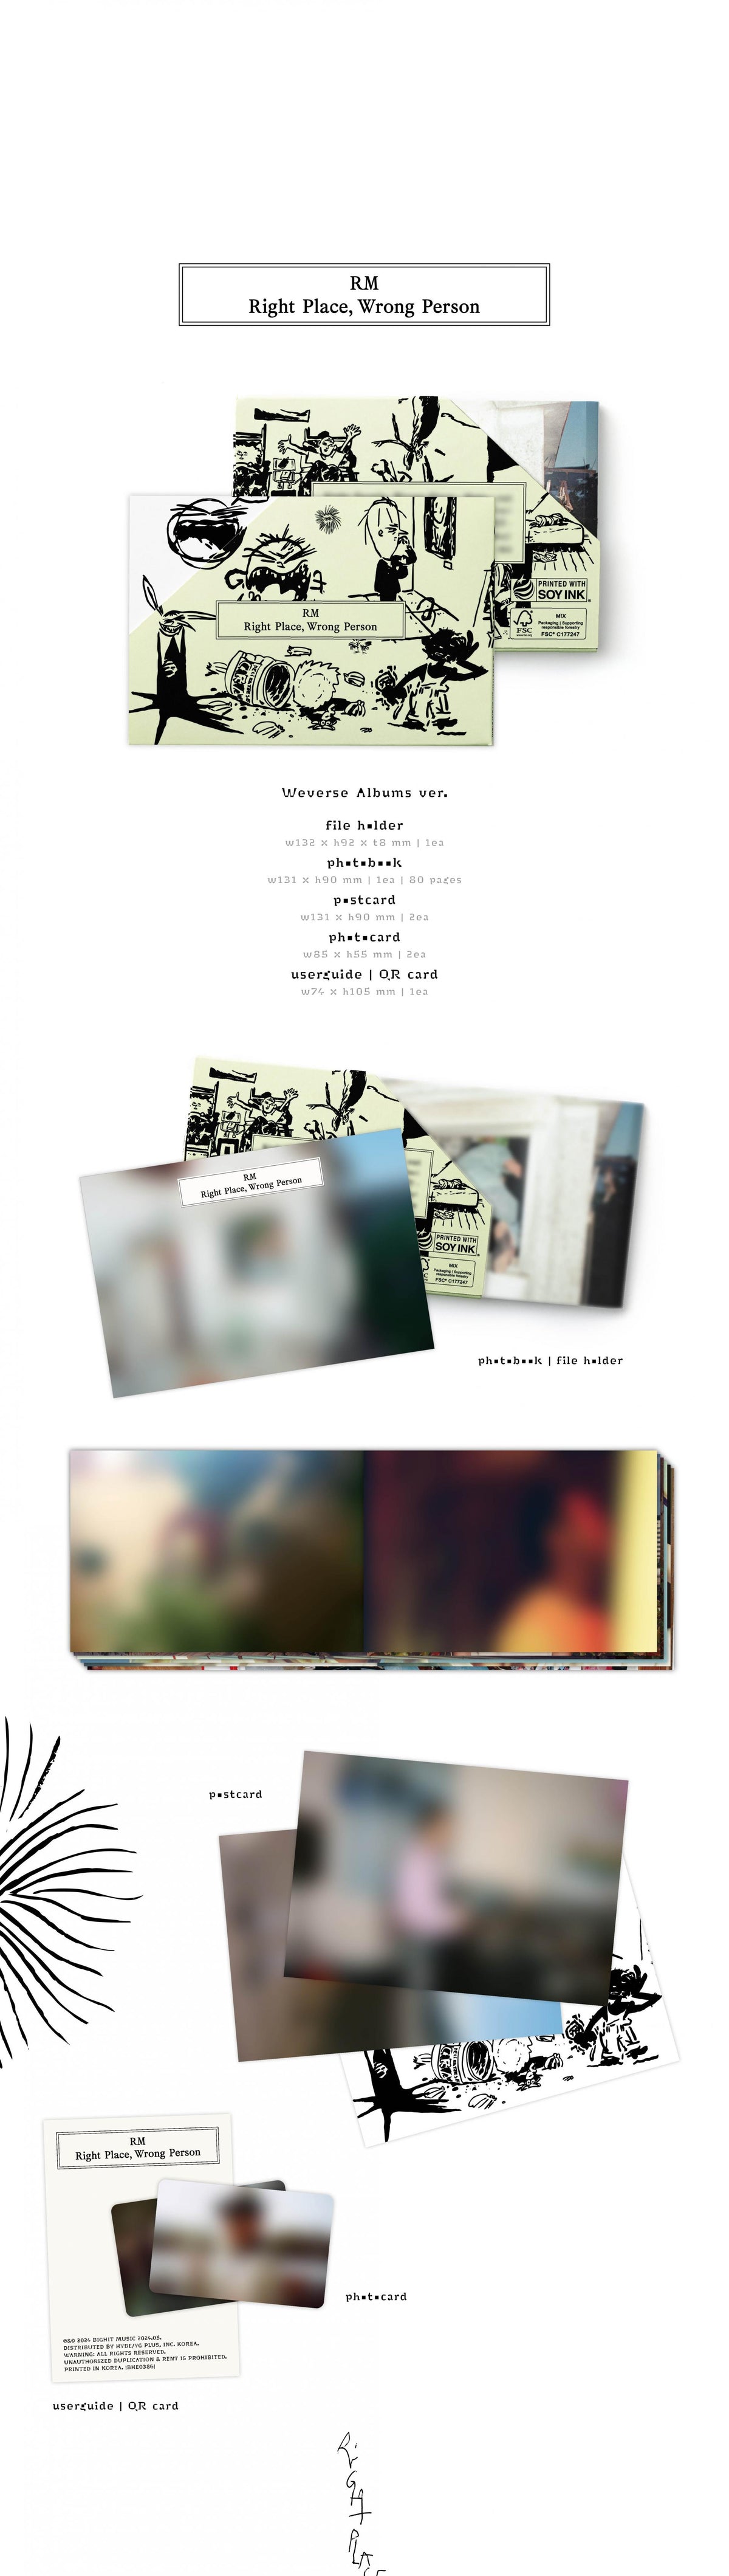 RM 2ND SOLO ALBUM - RIGHT PLACE, WRONG PERSON (WEVERSE ALBUMS VER.)